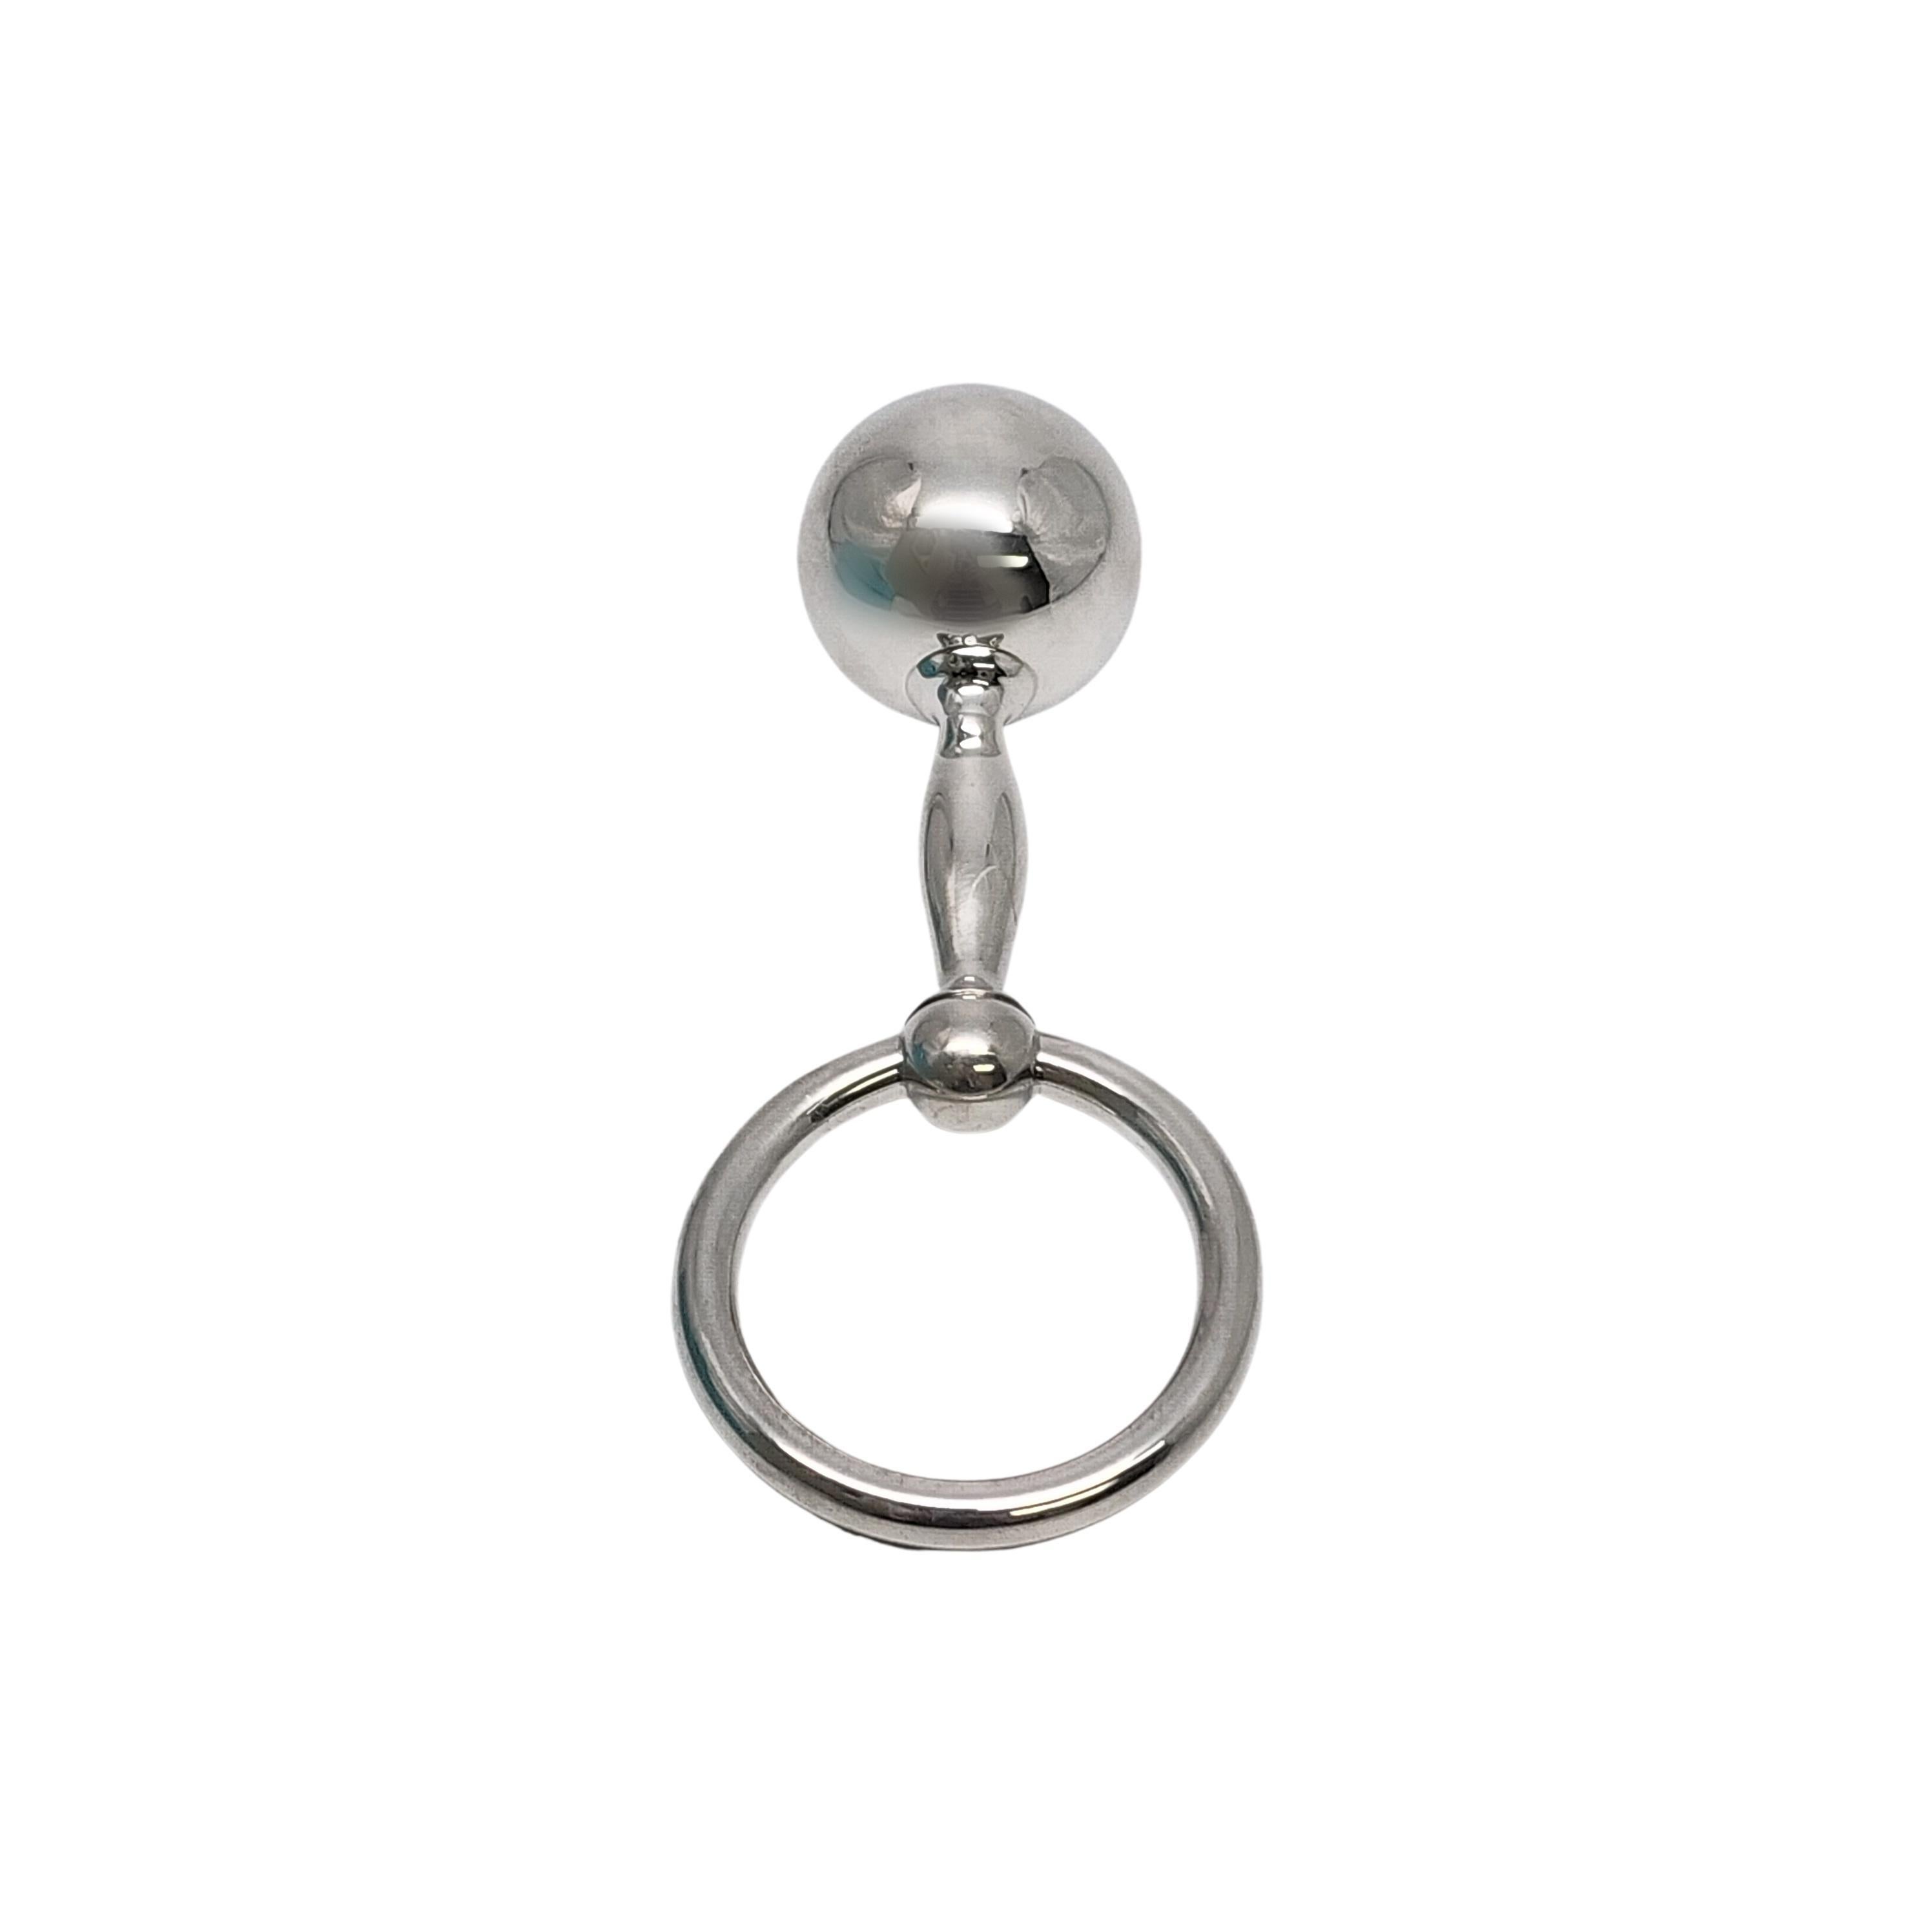 Tiffany & Co sterling silver barbell teething ring rattle with Tiffany box and pouch.

This is a beautiful and charming authentic sterling silver baby rattle designed by Tiffany & Co featuring a barbell on one side and a teething ring on the other